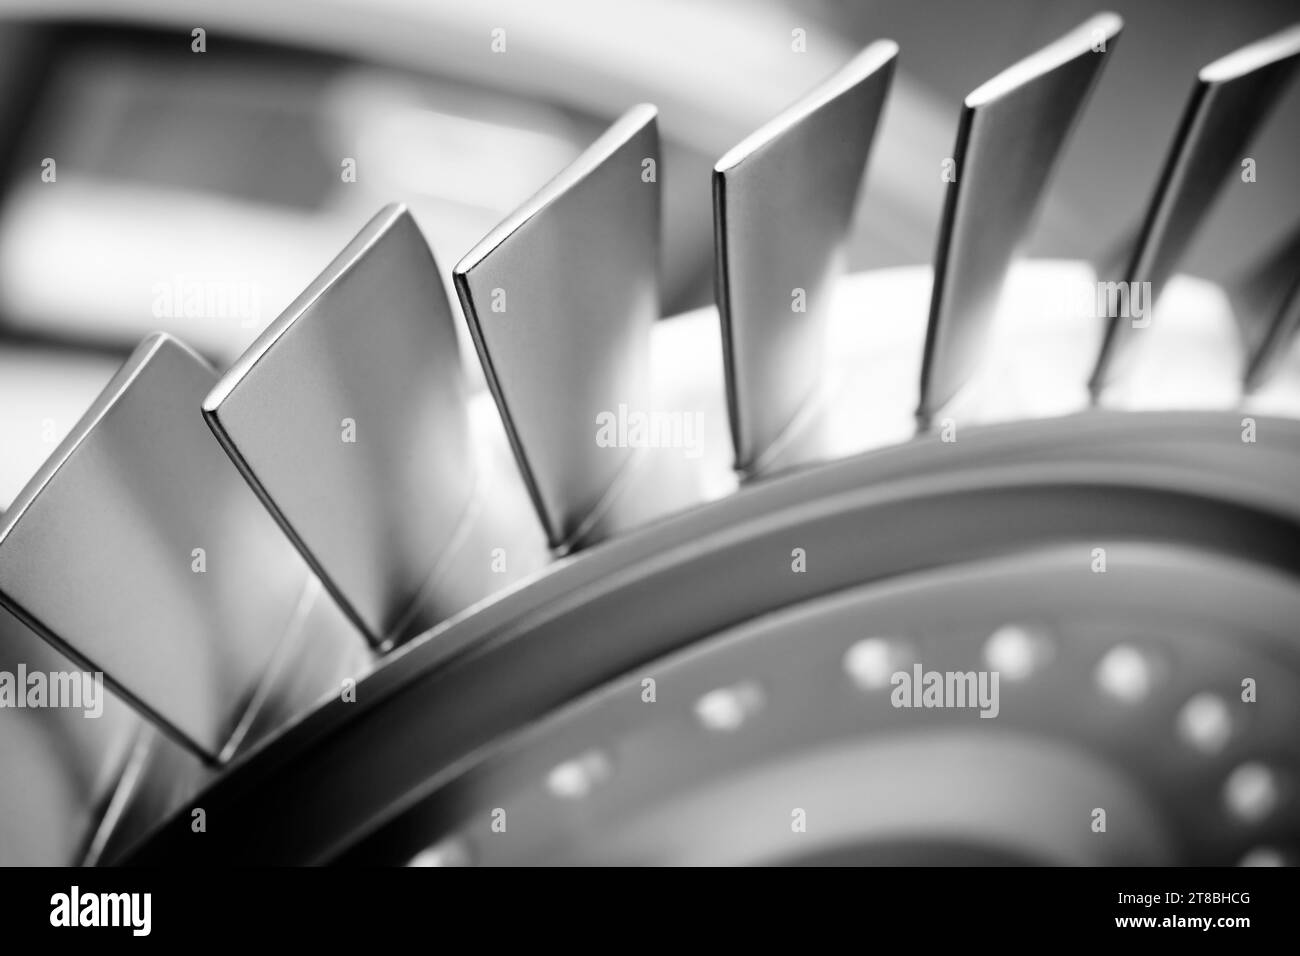 Steel blades of turbine propeller. Close-up view. Selected focus on foreground, industrial additive machinery technologies concept Stock Photo